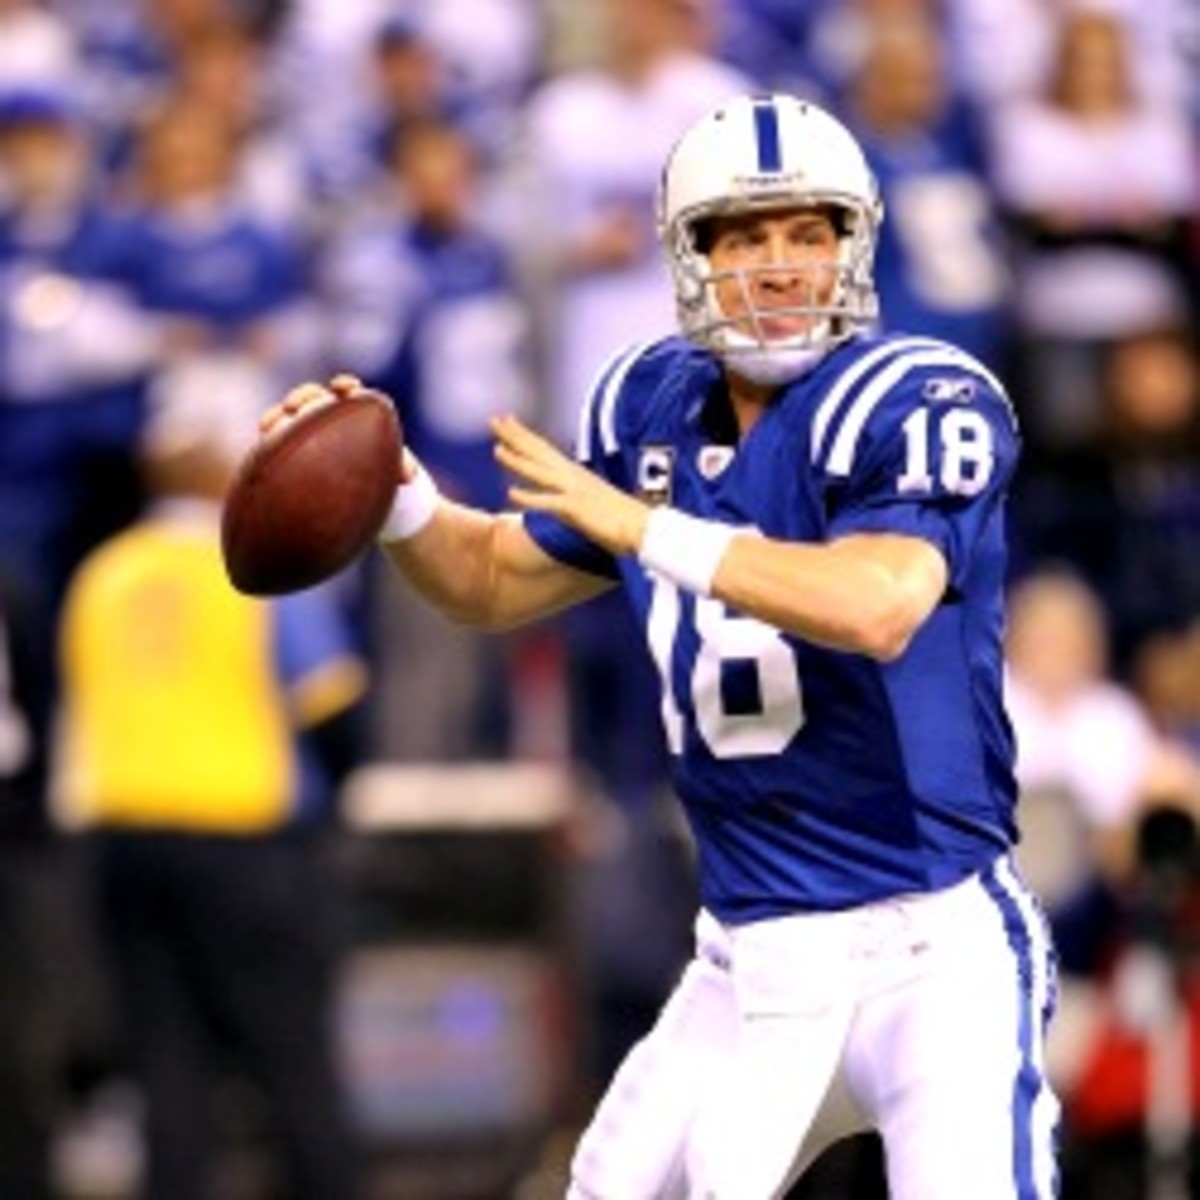 The Colts reportedly tried to trade Peyton Manning in 2004. (Andy Lyons/Getty Images)